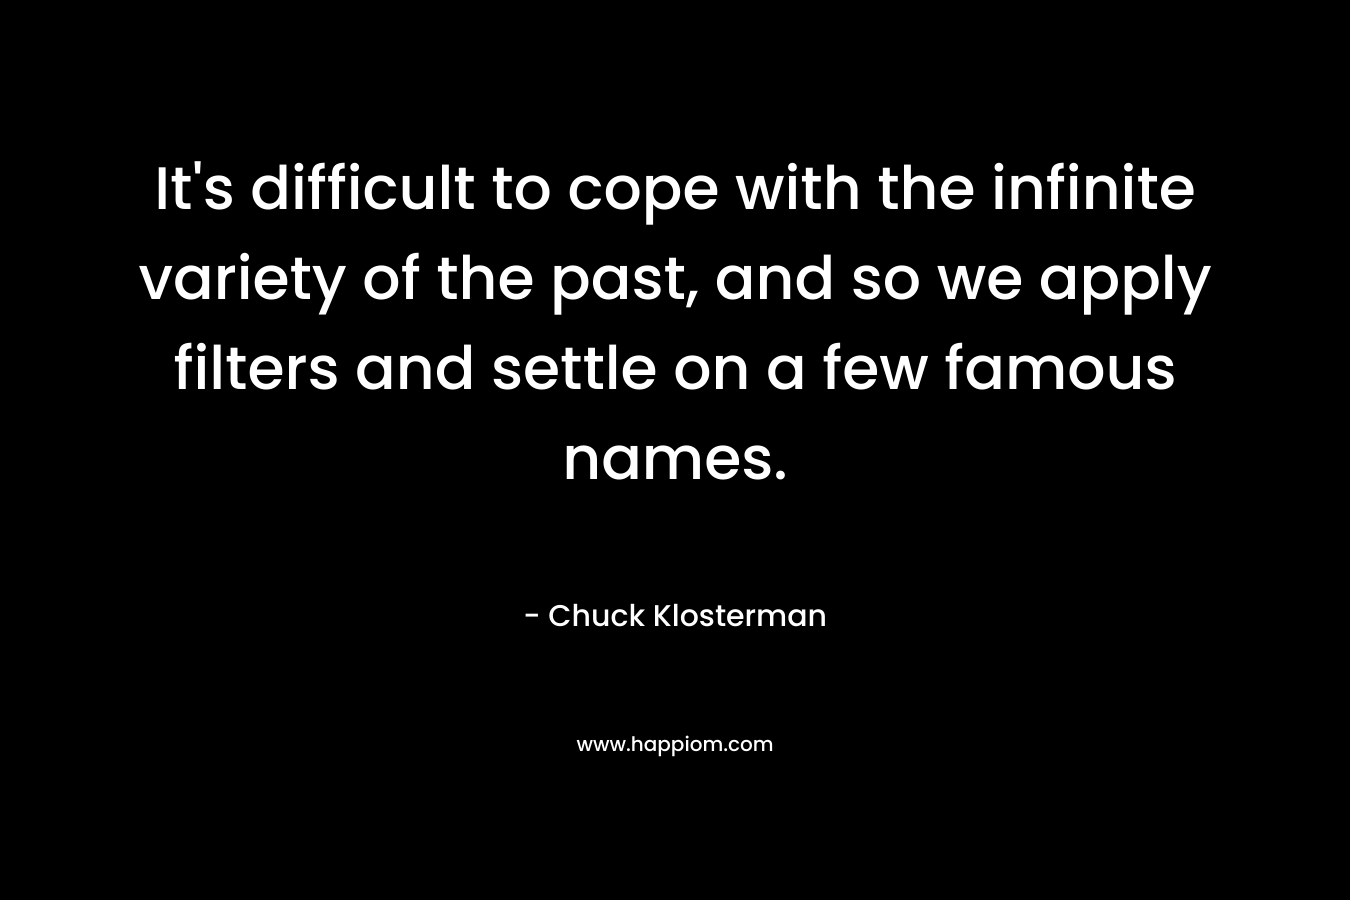 It’s difficult to cope with the infinite variety of the past, and so we apply filters and settle on a few famous names. – Chuck Klosterman